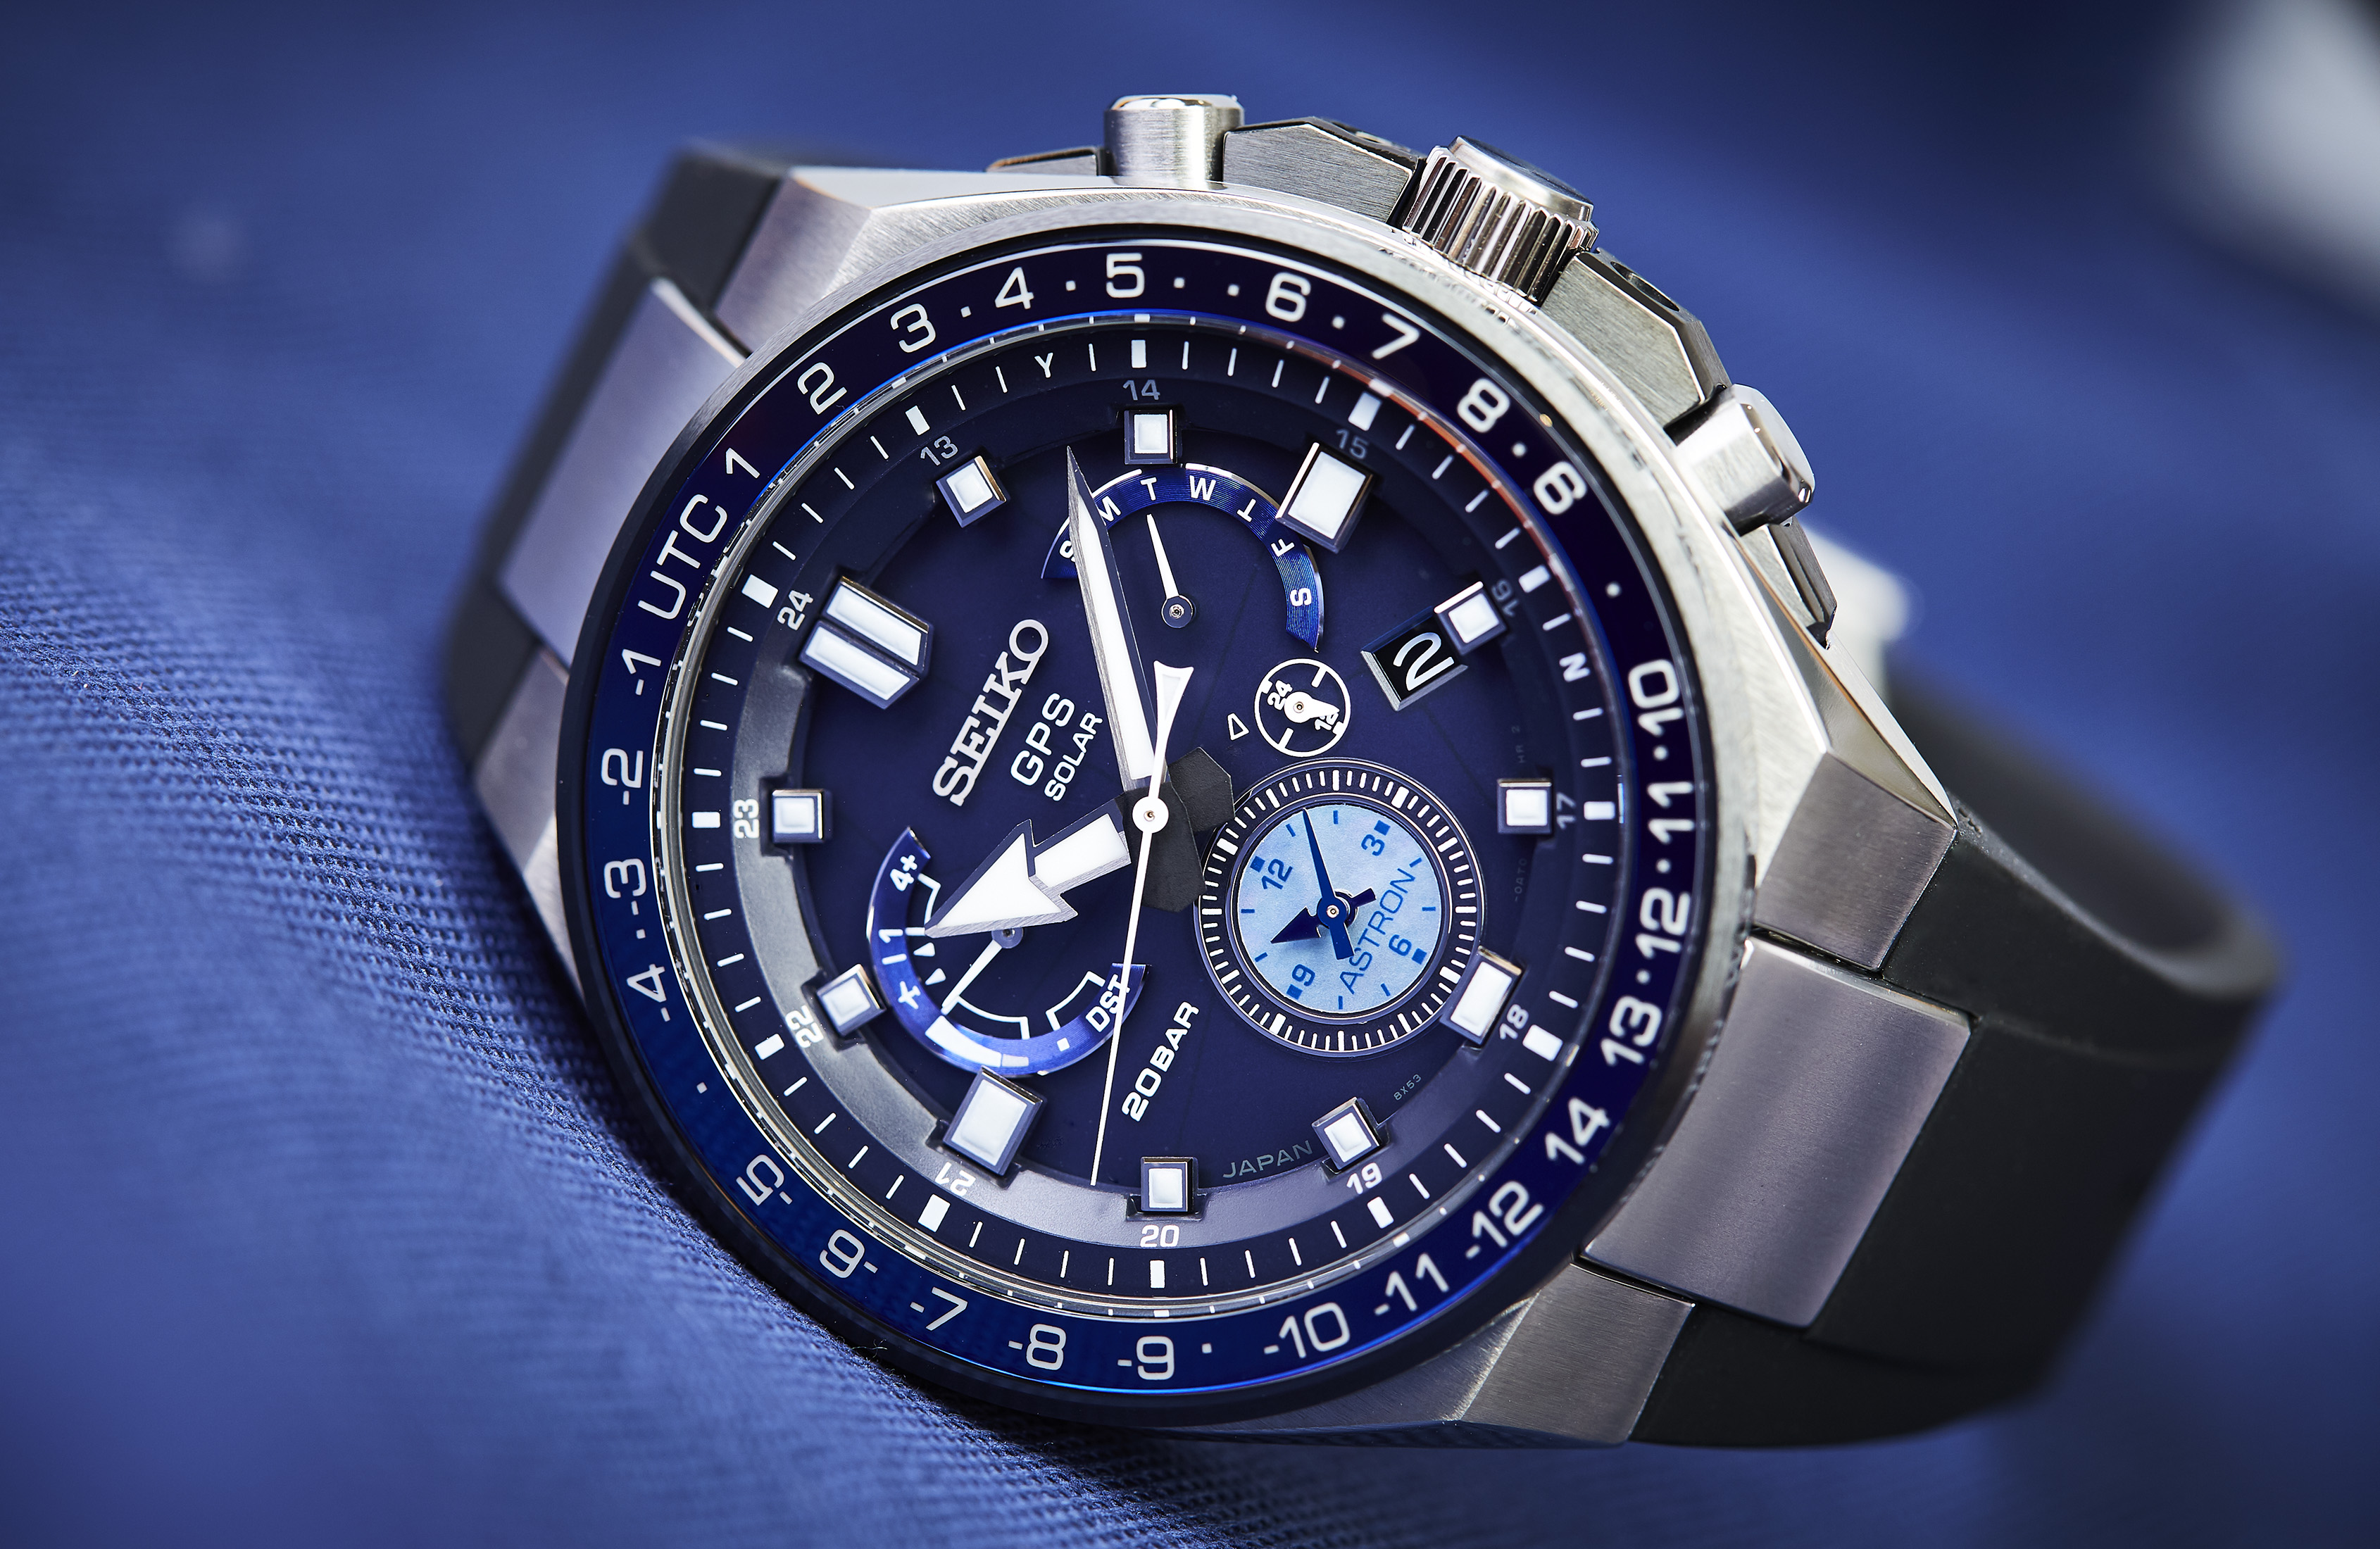 Solar flair: Which Seiko Astron watch is right for you?